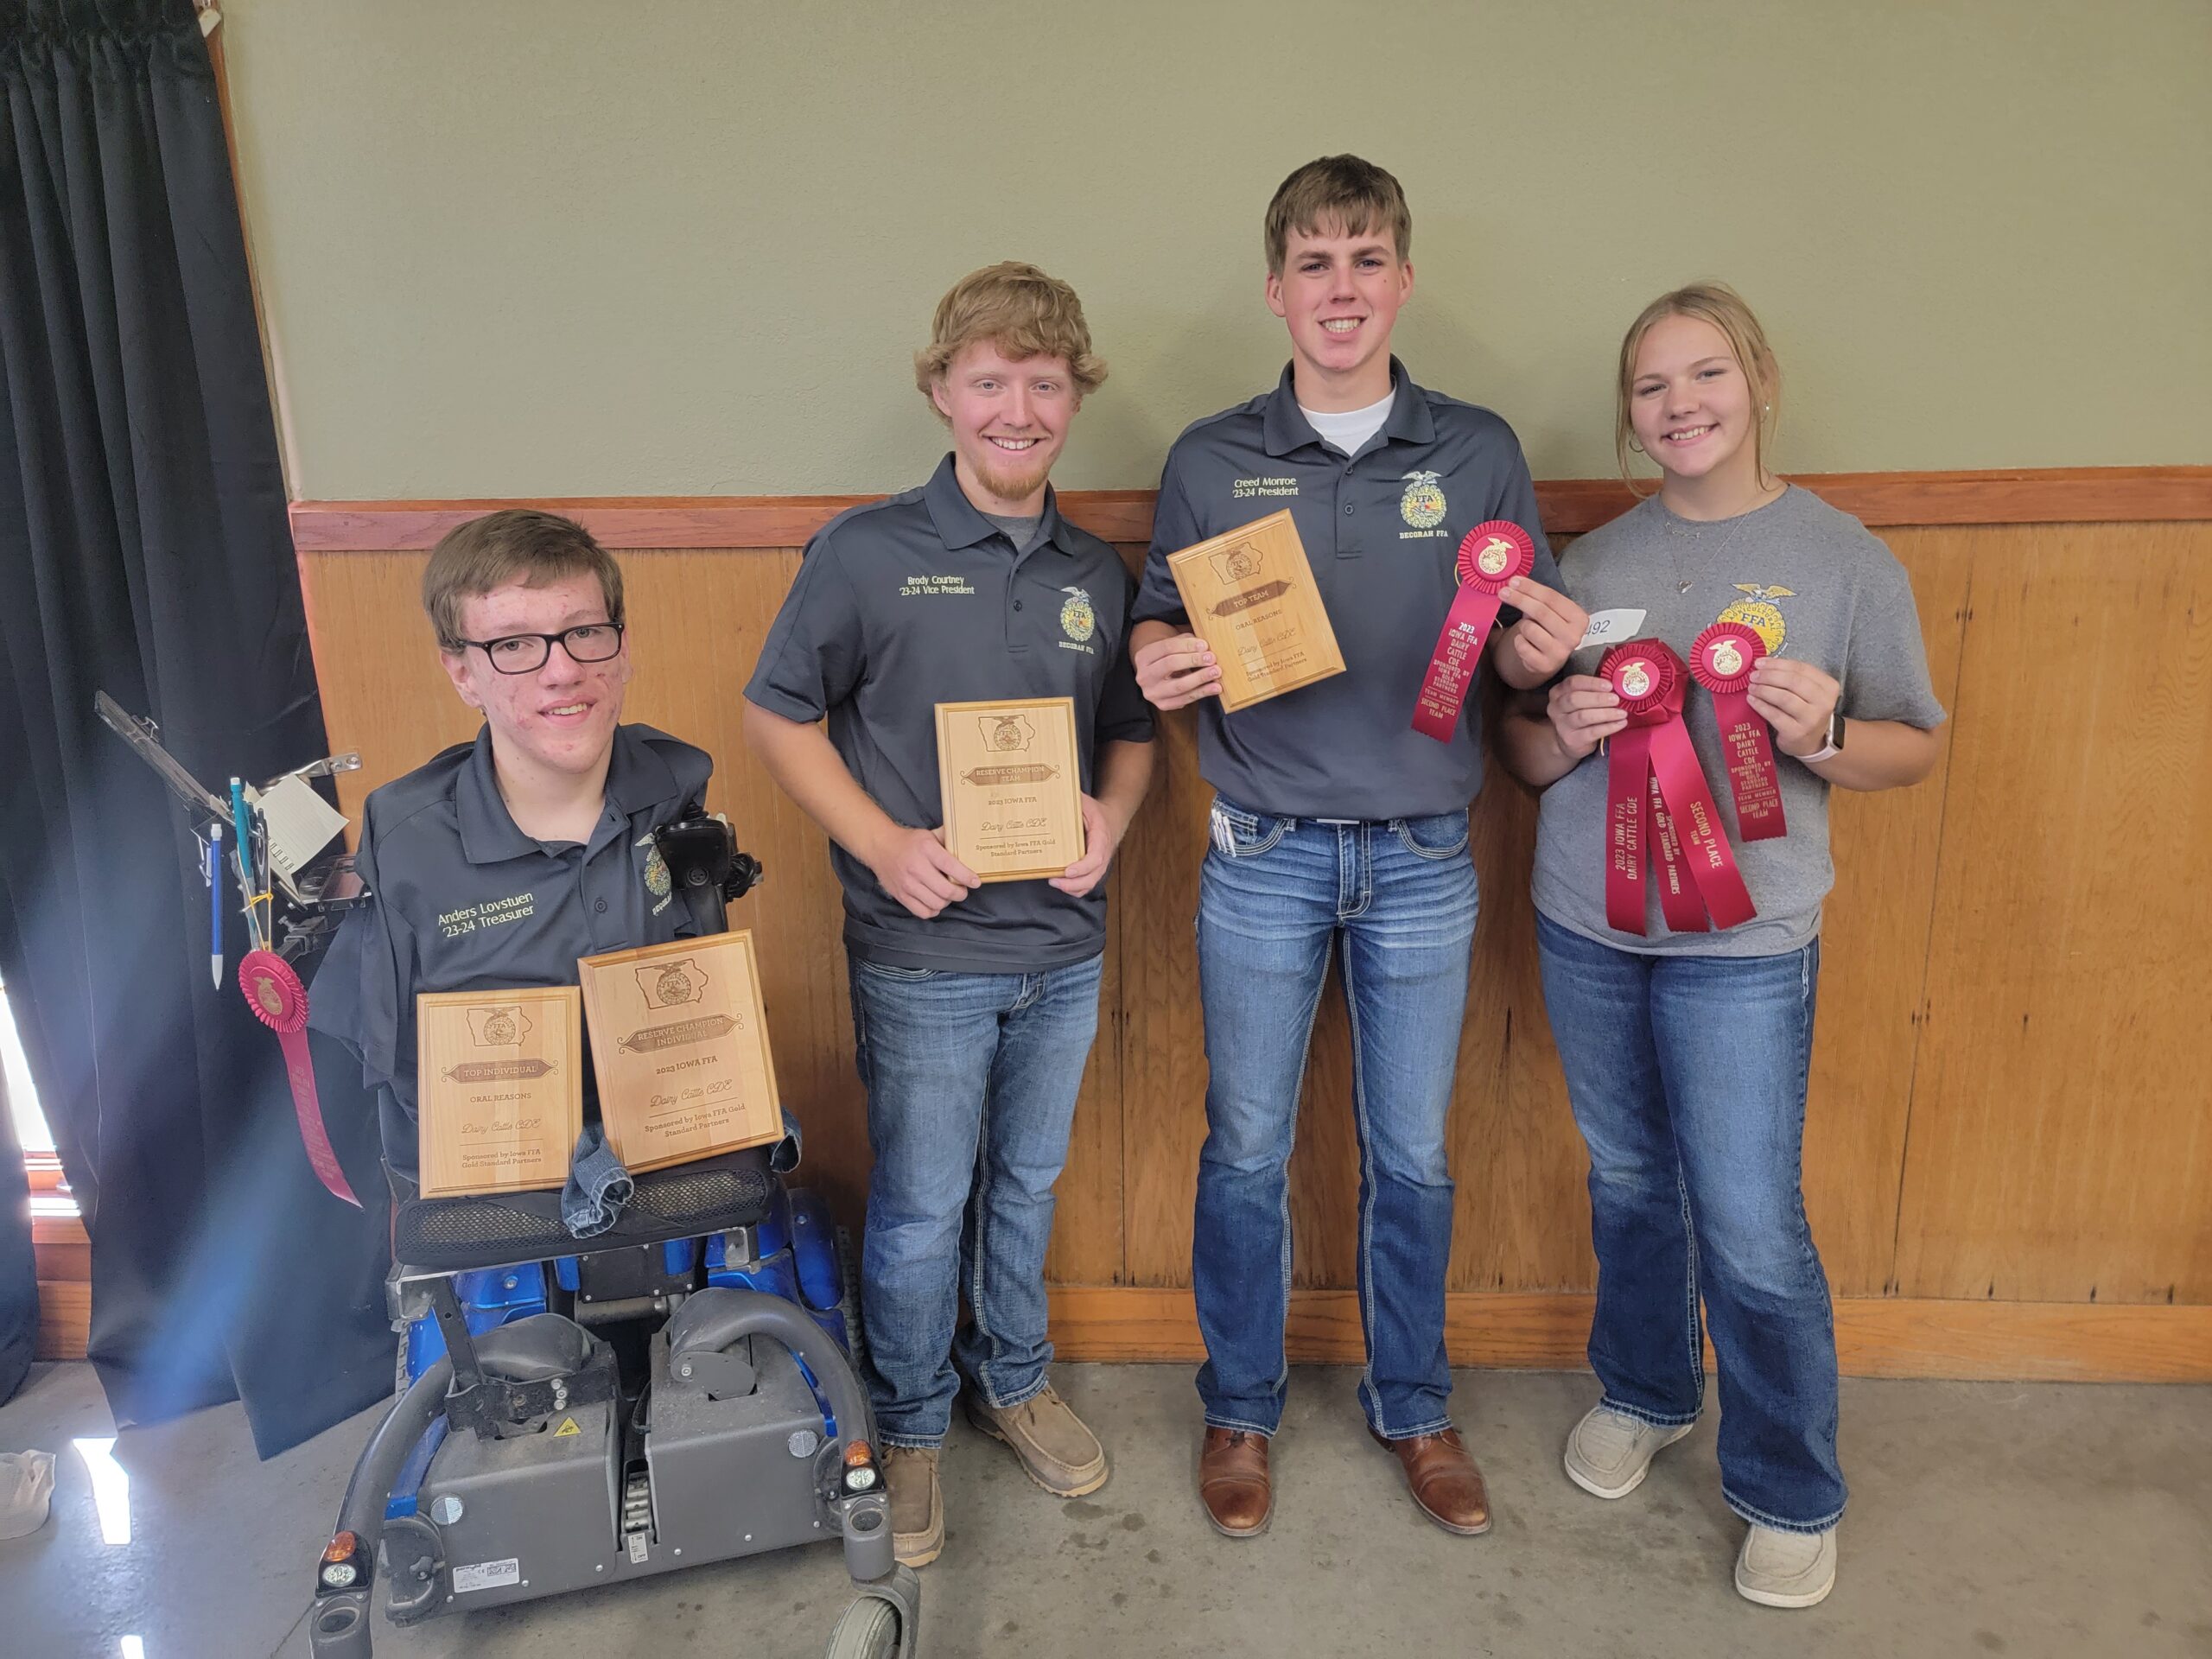 https://decorah.k12.ia.us/app/uploads/2023/09/9.8.23-State-Dairy-Cattle-Evaluation-Lovstuen-Courtney-Monroe-Eberling-2nd-place-team-1st-place-team-in-oral-reasons-2nd-place-individual-Anders-scaled.jpg